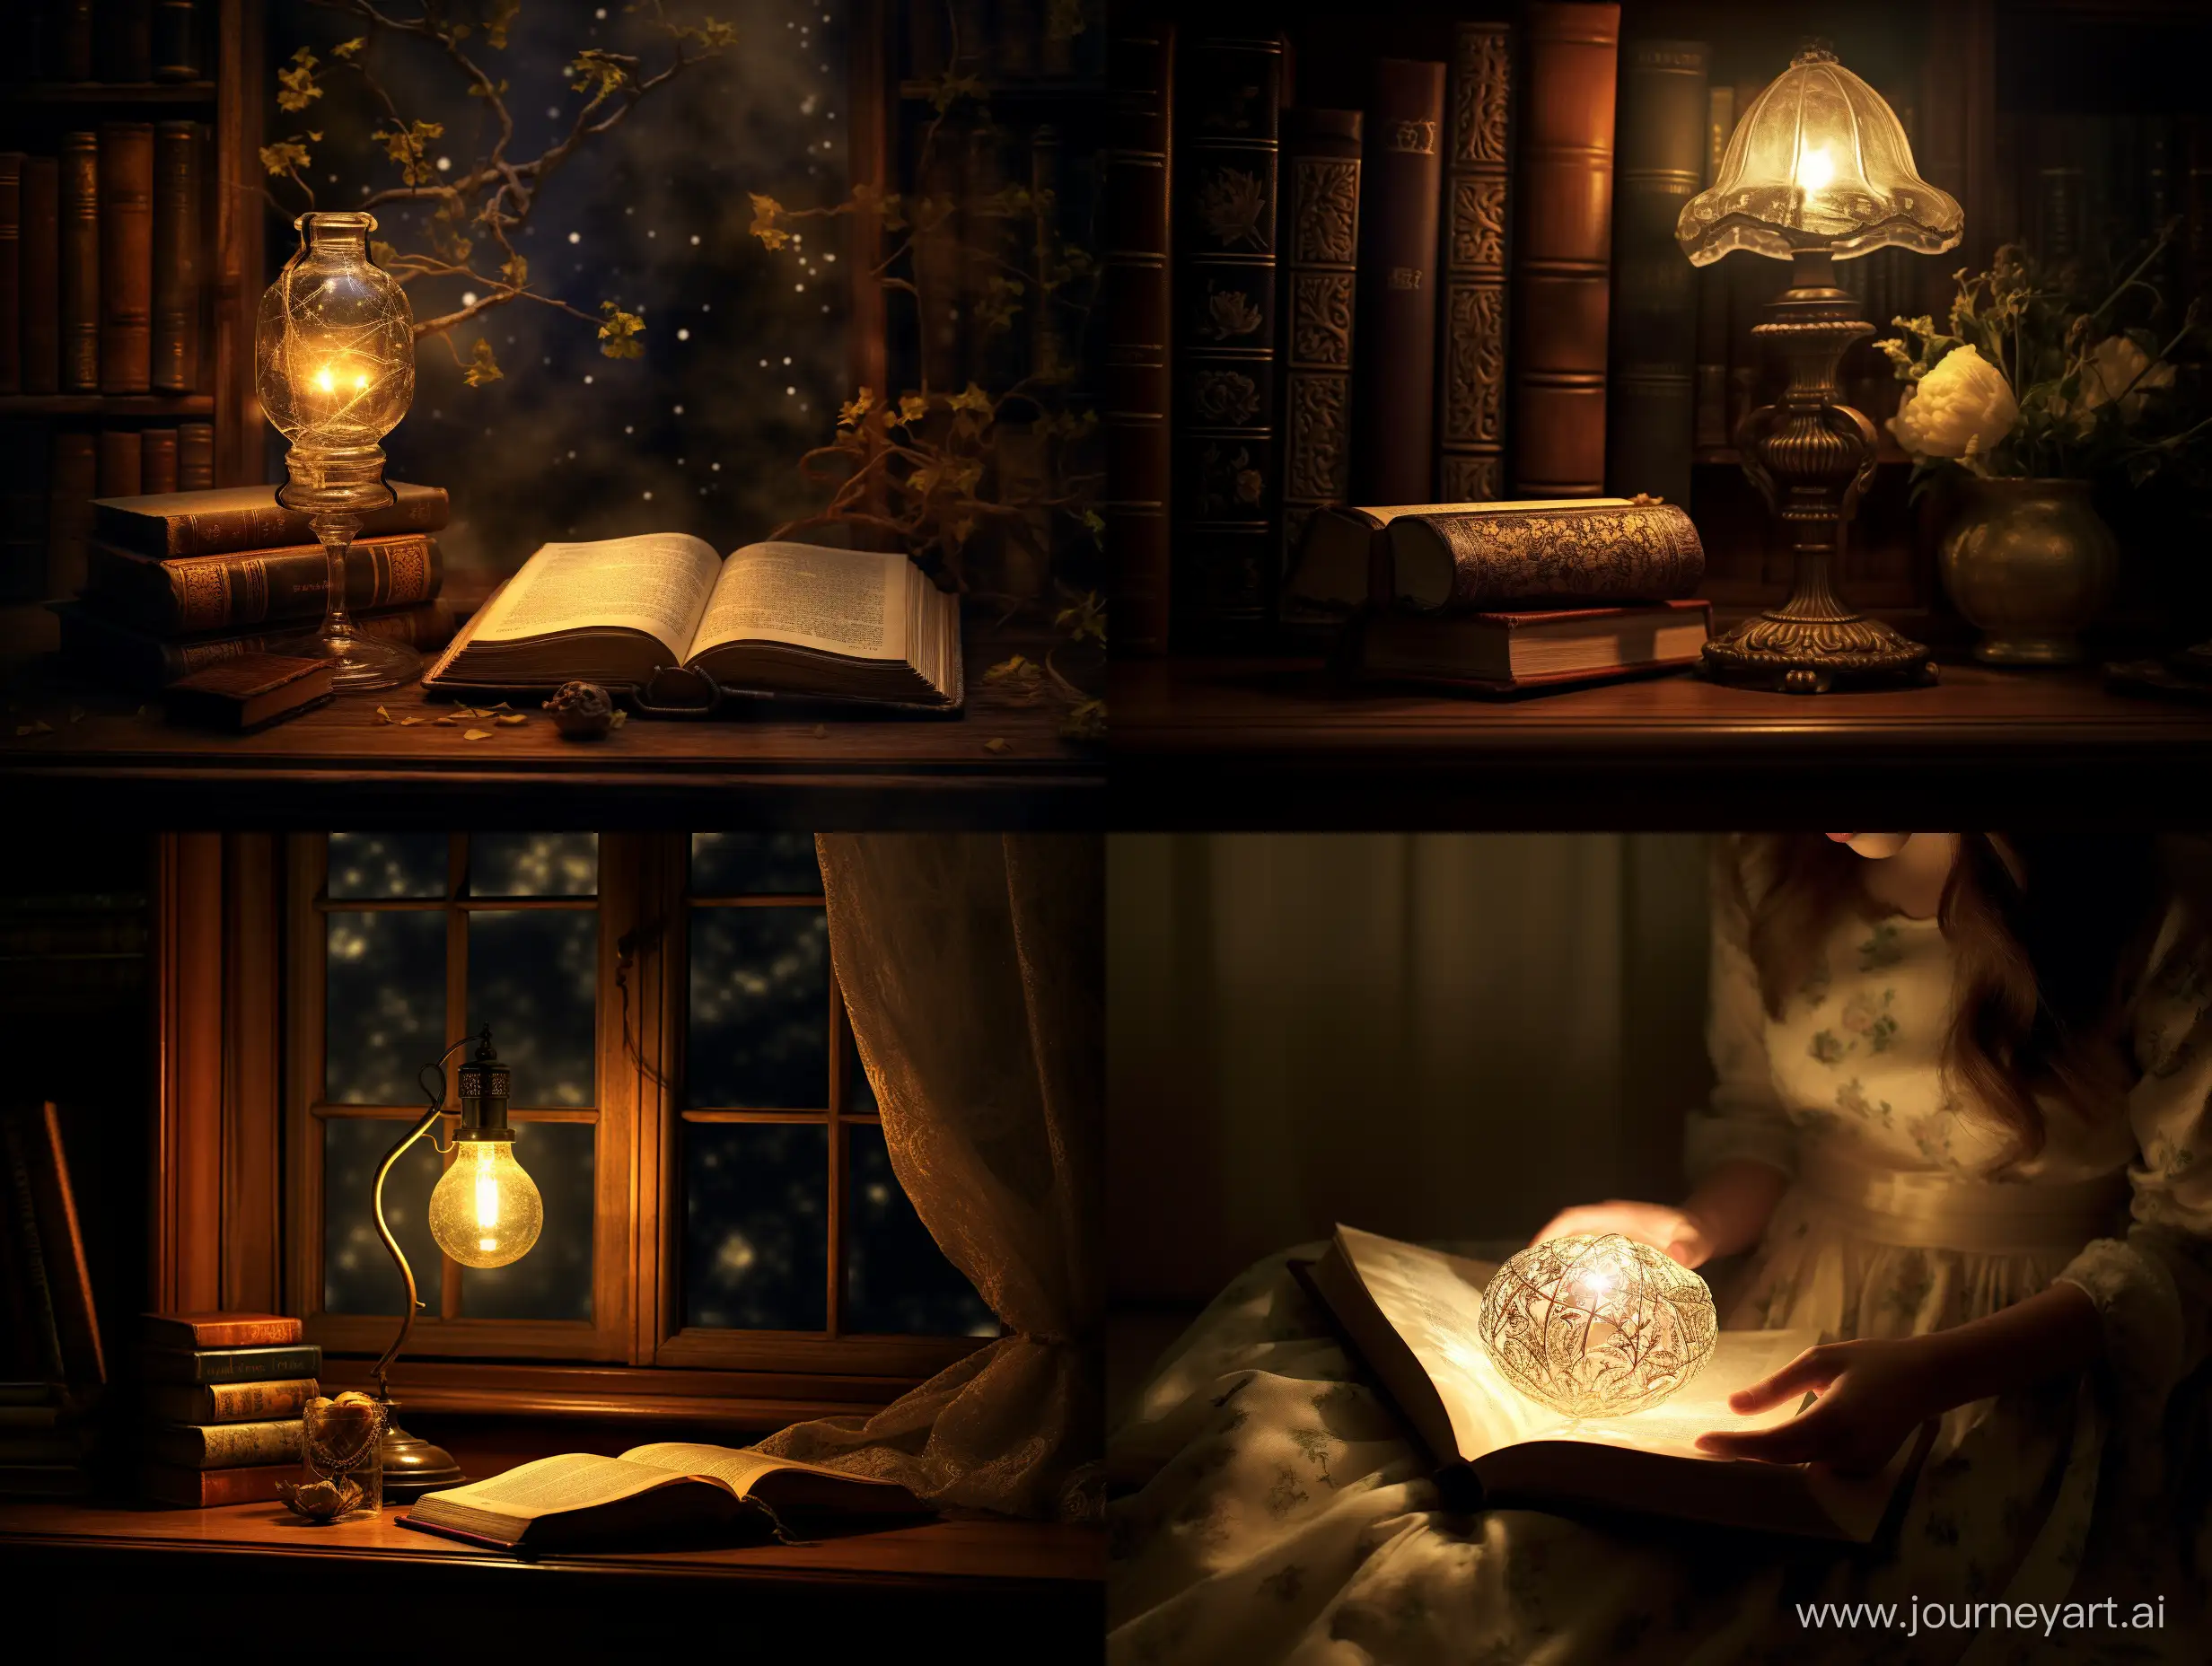 Under the dim glow of a lamp, I wander aimlessly until my eyes catch a book with glowing edges that draws my attention. Just as I reach out to touch it, the library plunges into darkness, leaving only the faint glow emanating from the pages of the book. My heartbeat accelerates as I look around, relying solely on this weak light. Suddenly, a deep voice resonates in the darkness, "True knowledge requires the courage to discover it. Are you ready?" This scene is filled with mystery and anticipation, highlighting the moment of unexpected adventure in the quest for knowledge.